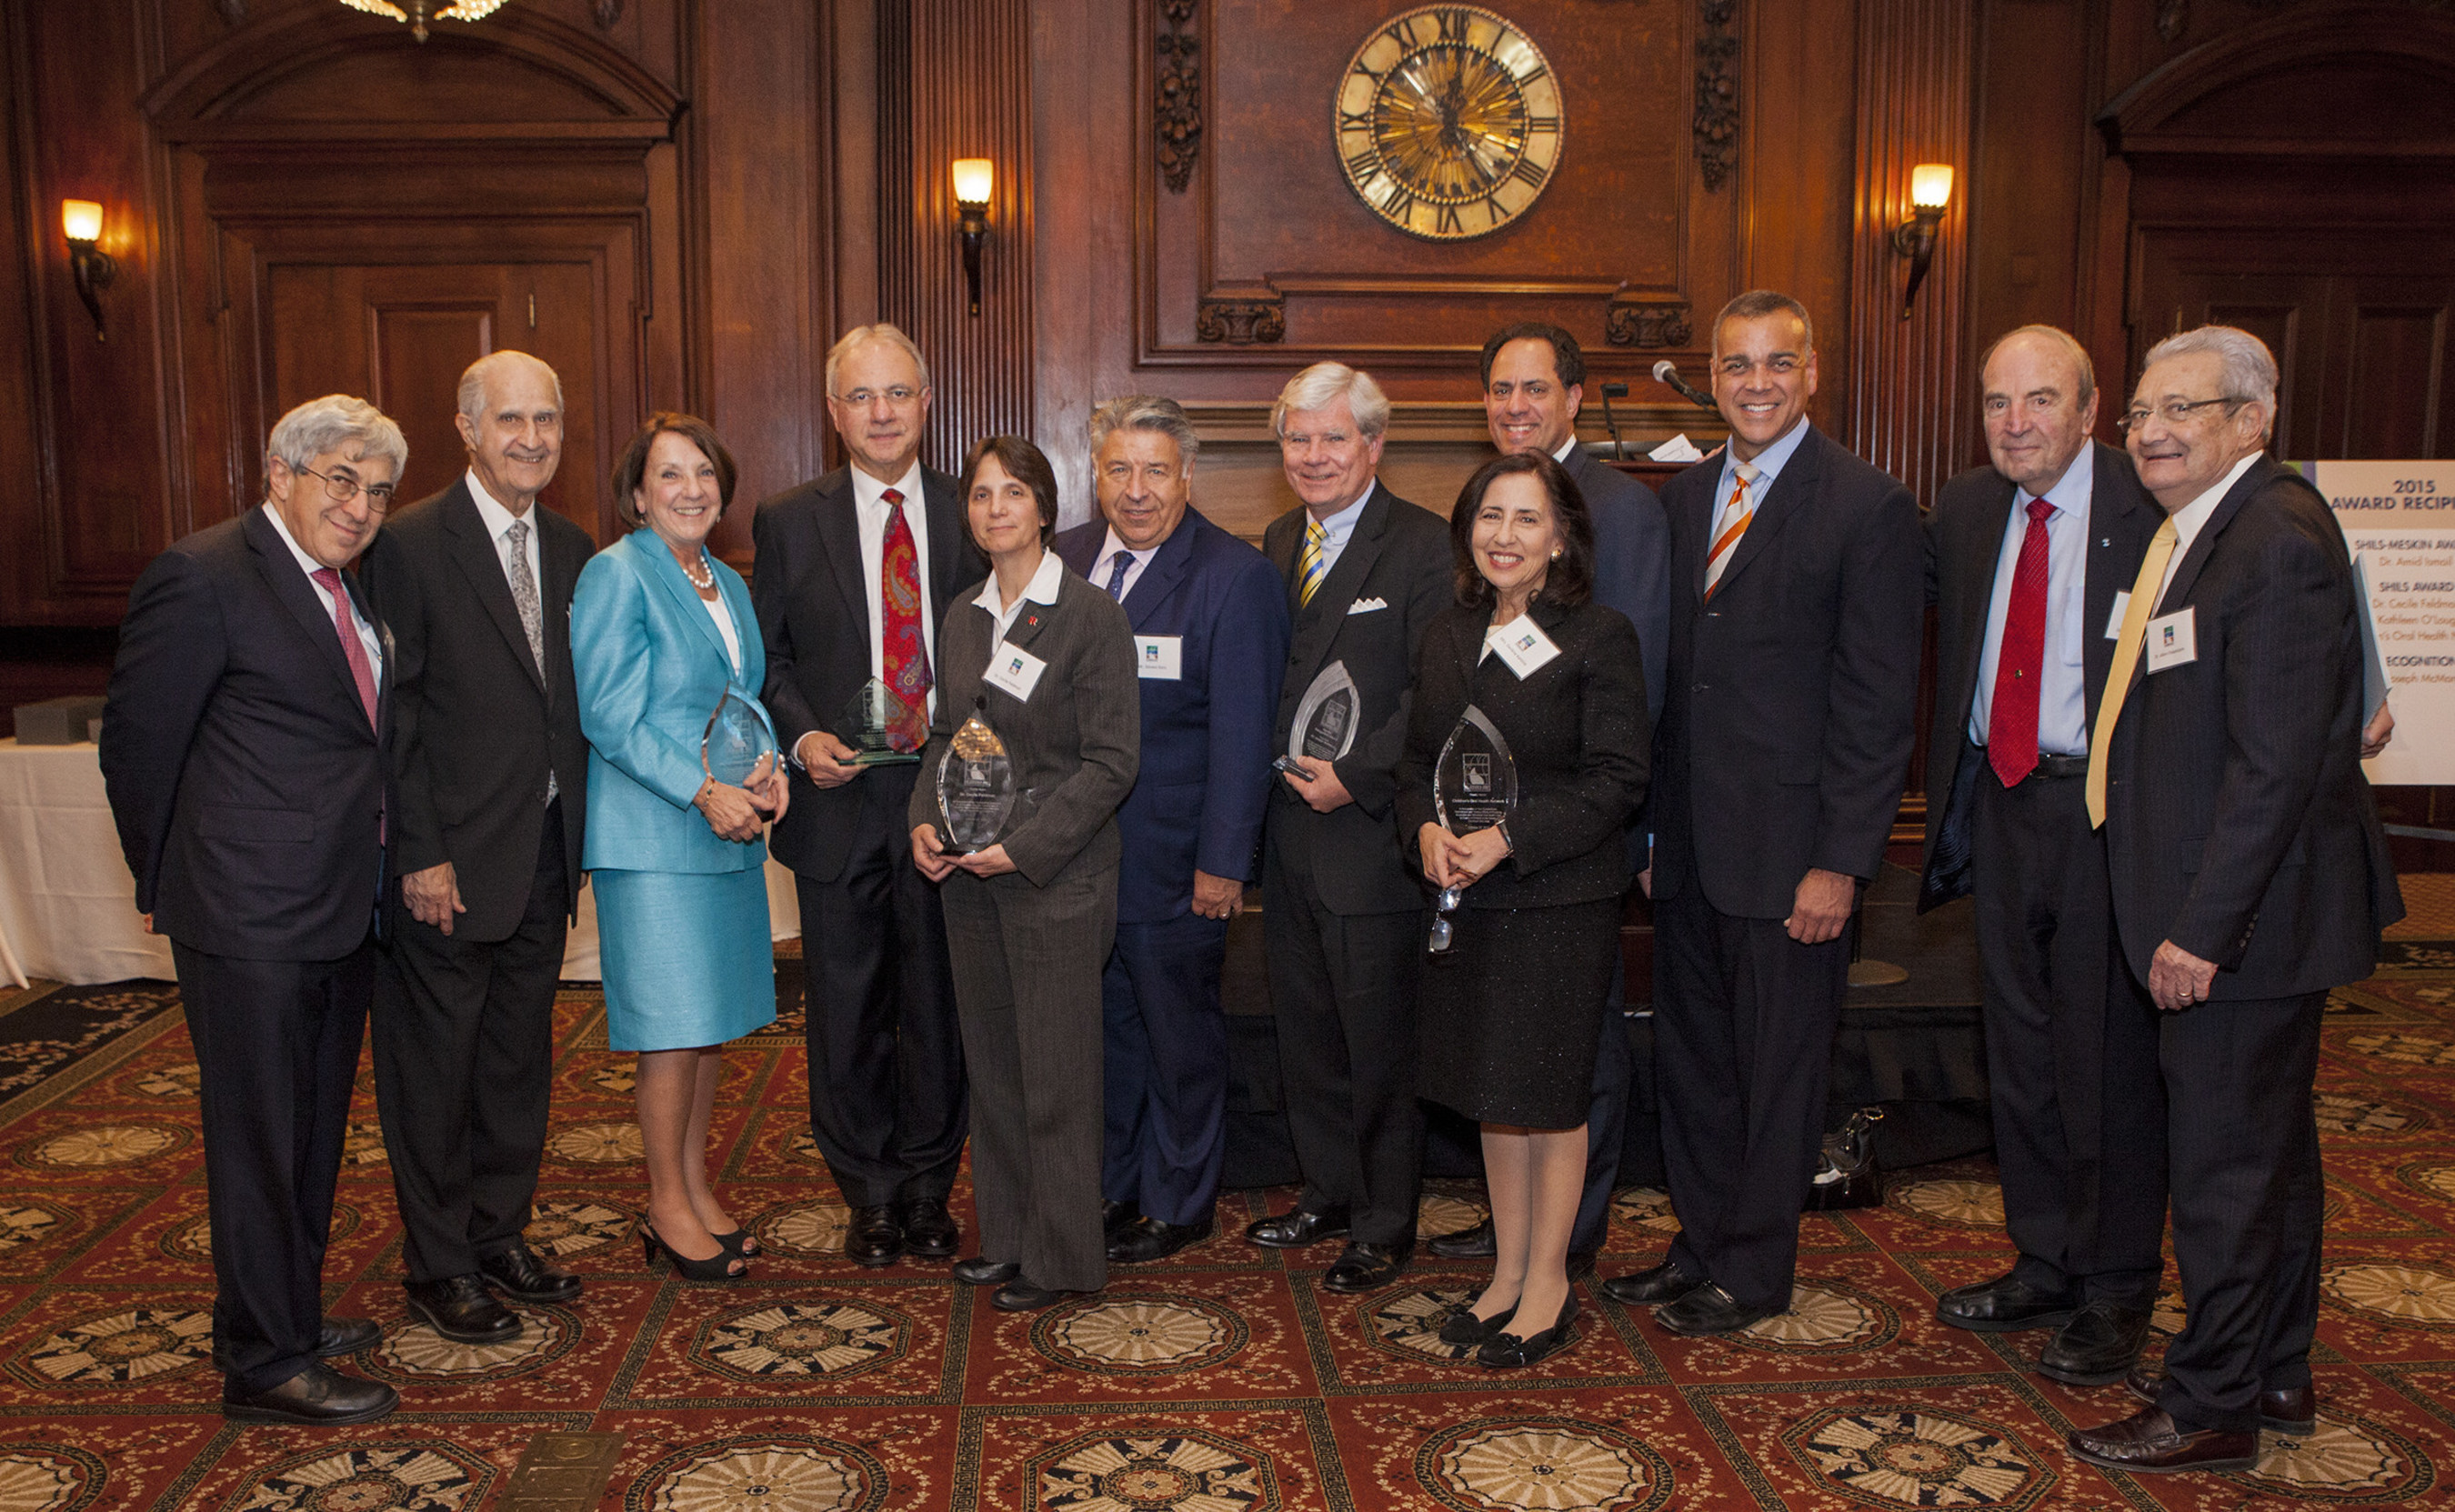 The Dr. Edward B. Shils Entrepreneurial Fund presented its 2015 Shils Awards at its annual gala held October 27, 2015, honoring the people, organizations, and programs that positively influence the dental community and the public oral health arena.